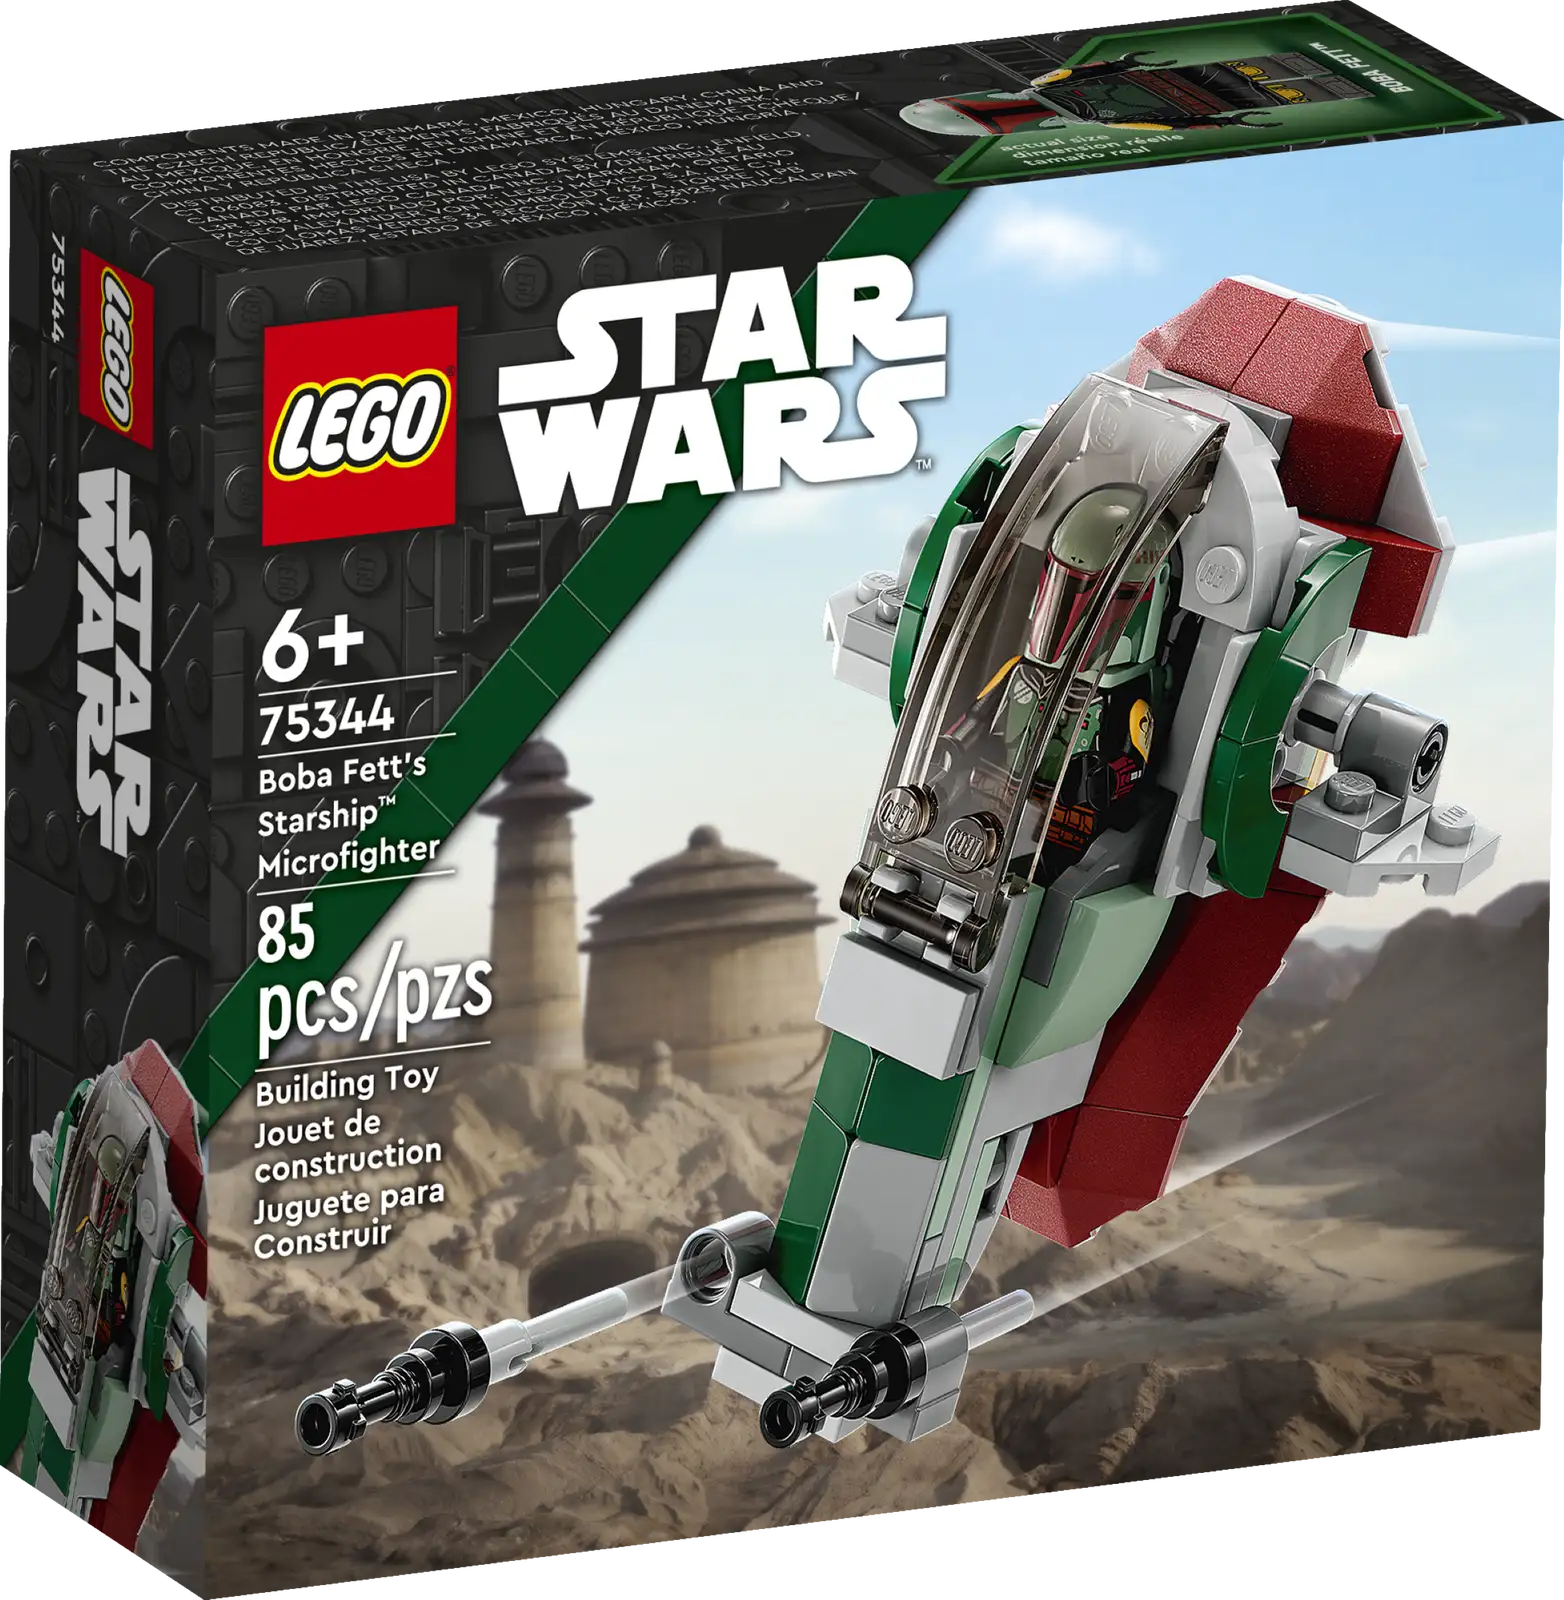 Give kids a cool introduction to LEGO® Star Wars™ building toys with Boba Fett’s Starship Microfighter (75344) for ages 6 and up. This microscale LEGO brick version of the iconic starship, as seen in the classic Star Wars saga, Star Wars: The Mandalorian and Star Wars: The Book of Boba Fett, features 2 flick shooters for attacking enemy starfighters and adjustable wings for flight and landing. The included LEGO minifigure of Boba Fett, which comes with a blaster and a jetpack accessory element, fits inside the opening cockpit. LEGO Builder app Add an extra dimension to your youngster’s fun, creative experience with the LEGO Builder app, featuring instructions and interactive zoom and rotate viewing tools to help them build with confidence. Galaxy of adventures The LEGO Group has been recreating starships, vehicles, locations and characters from the Star Wars universe since 1999, and there is a huge variety of sets that make super gifts for fans of all ages. Quick-build LEGO® Star Wars™ Microfighter (75344) – Young fans can play out Star Wars: The Book of Boba Fett stories with this brick-built, microscale version of Boba Fett’s Starship Set includes a Boba Fett LEGO® minifigure – The LEGO Star Wars™ character Boba Fett has a blaster and jetpack accessory element to inspire creative play Fun features – Boba Fett’s Starship has an opening cockpit with space for the Boba Fett LEGO® minifigure, 2 flick shooters and adjustable wings for flight and landing Microfighter combos – This buildable toy playset combines with other LEGO® Star Wars™ Microfighters to open up even more action-play possibilities Anytime gift idea for ages 6 and up – Give this 85-piece LEGO® Star Wars™ construction toy to kids as a reward, surprise treat, birthday present or holiday gift Play on the go – The Microfighter measures over 2.5 in. (6 cm) high, 3.5 in. (9 cm) long and 3 in. (8 cm) wide. Slip it into a child’s backpack ready for play on their travels Interactive digital building – Want to give your young builder a more awesome building experience? Now you can with the LEGO® Builder app, featuring intuitive zoom and rotate modes Building toys for all ages – LEGO® Star Wars™ sets enable kids and adult Star Wars fans to recreate iconic scenes, role-play their own creative stories or simply display the brick-built models Quality assurance – LEGO® components meet strict industry quality standards to ensure that they connect consistently and securely for robust builds Safety first – LEGO® building bricks and pieces are dropped, heated, crushed, twisted and carefully analyzed to make sure they meet rigorous global safety standards